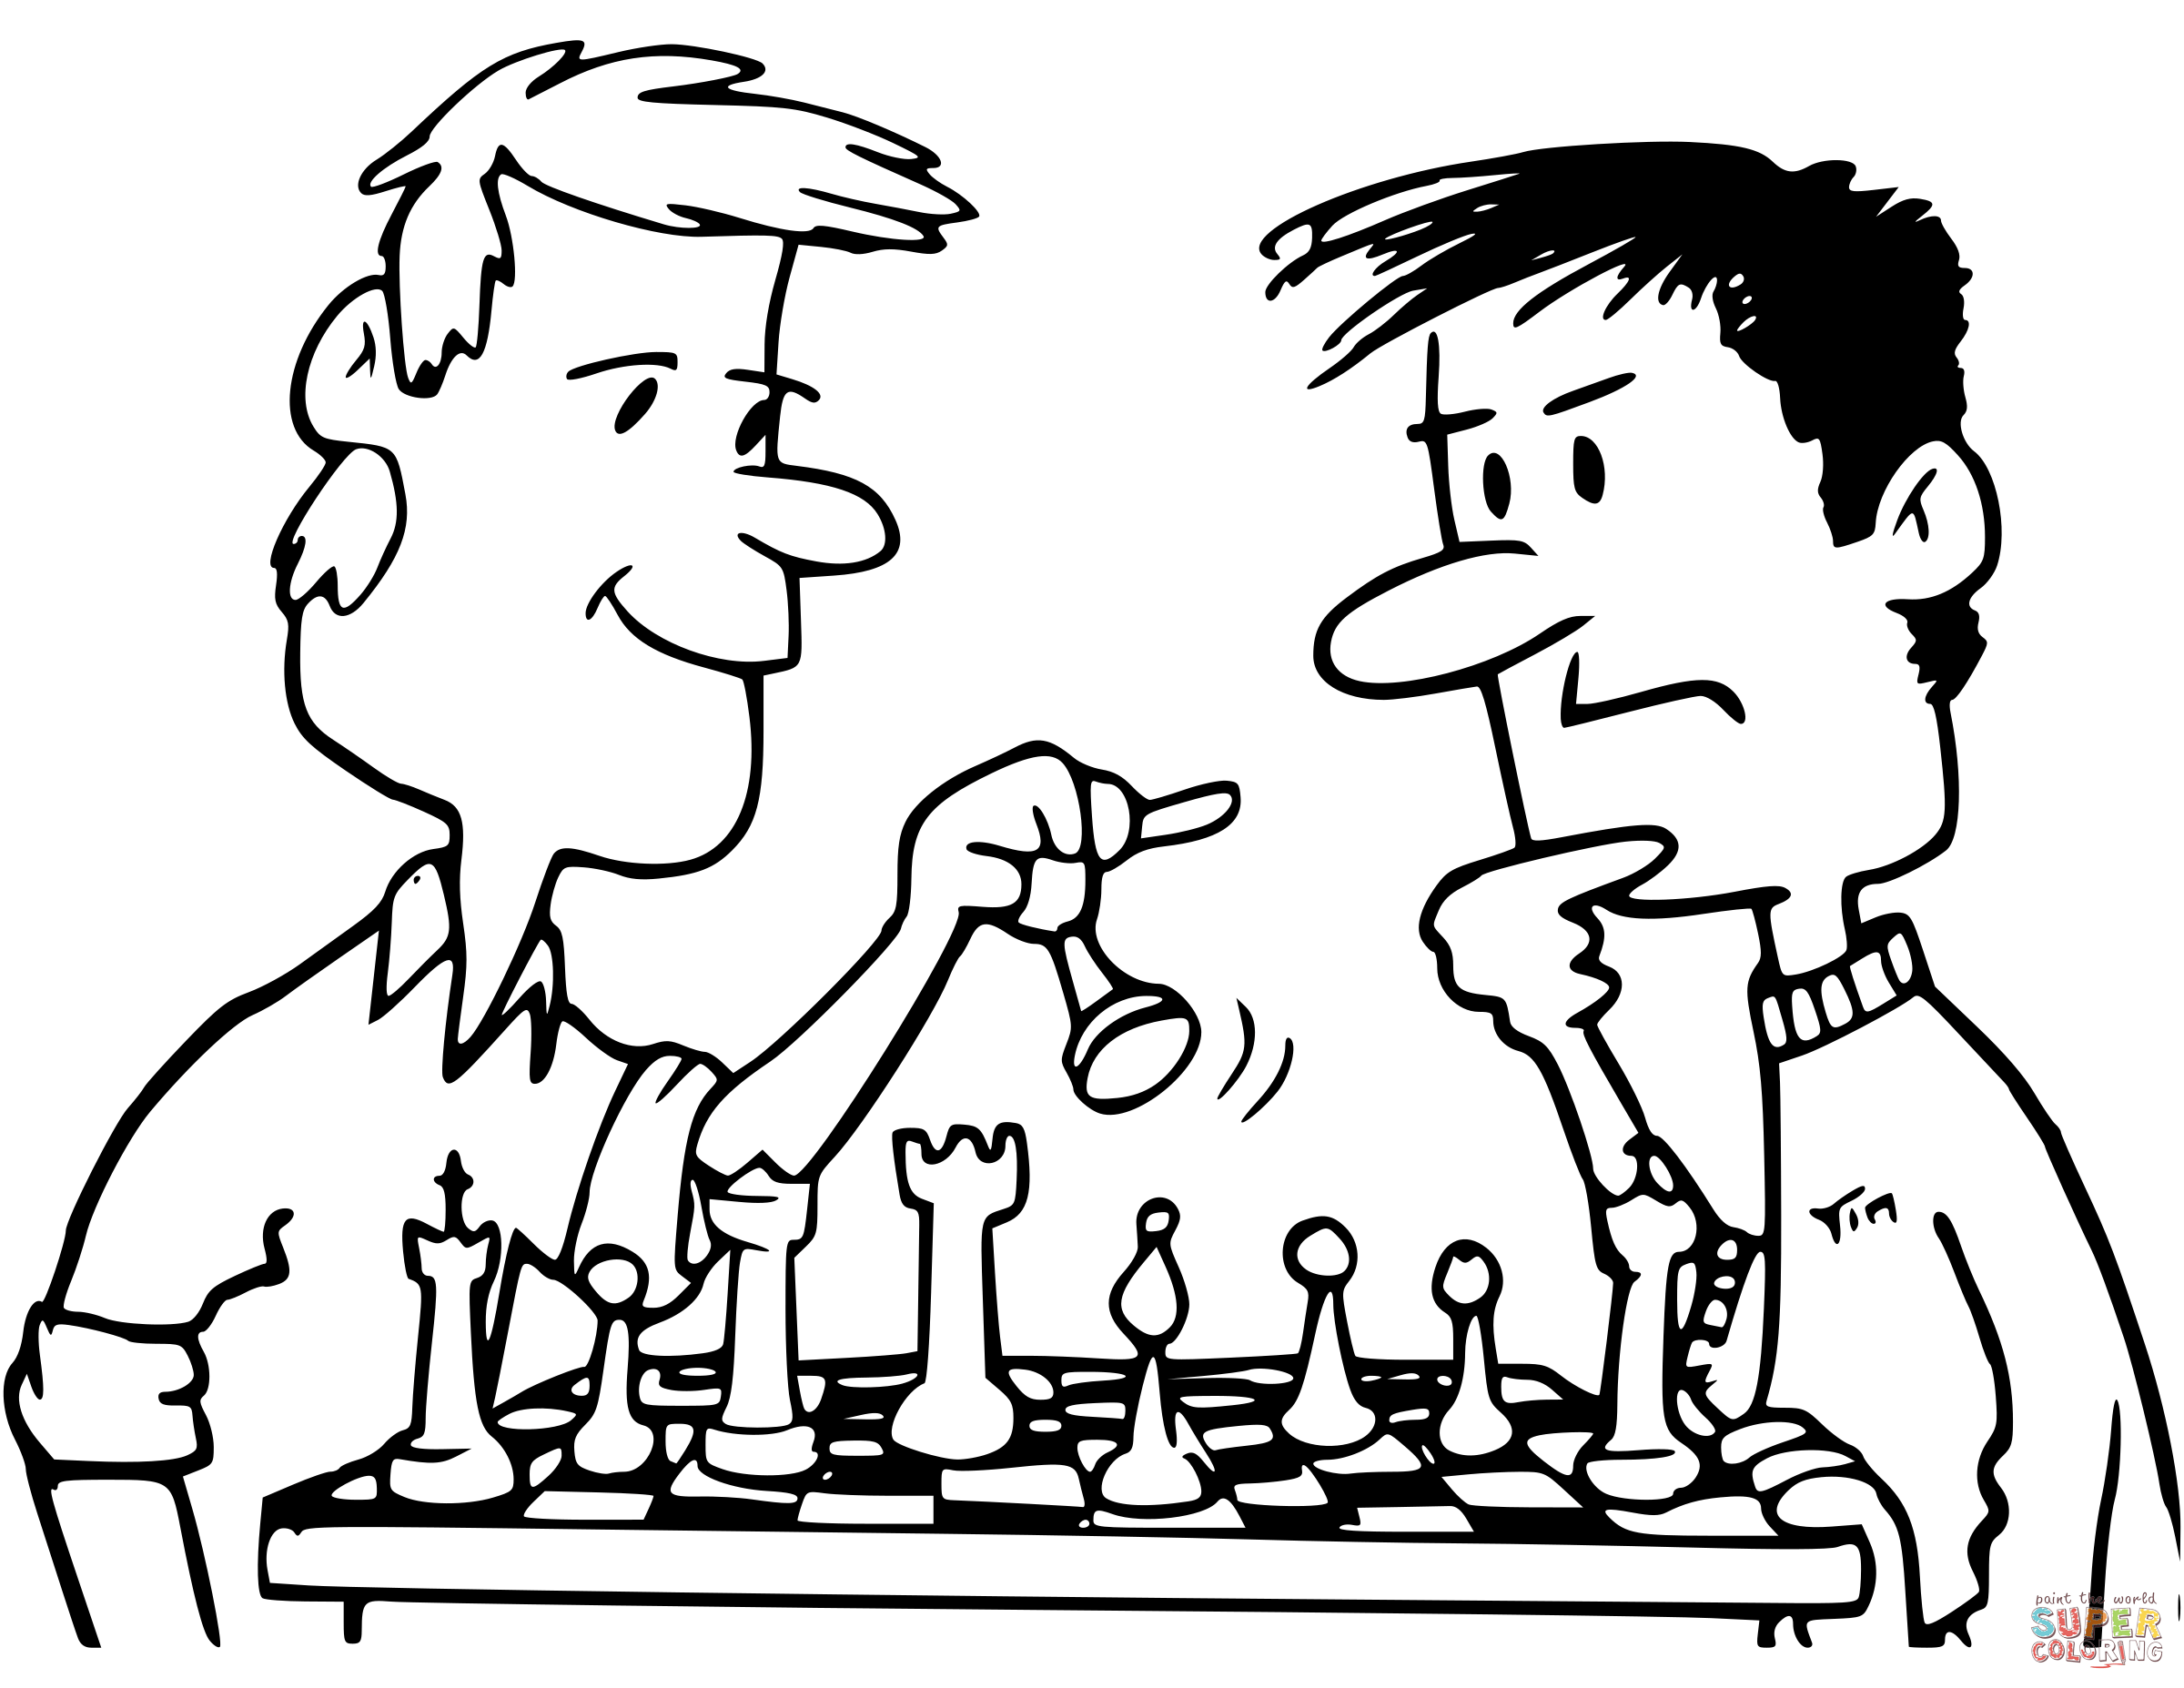 Friends Playing Chess coloring page | Free Printable Coloring Pages